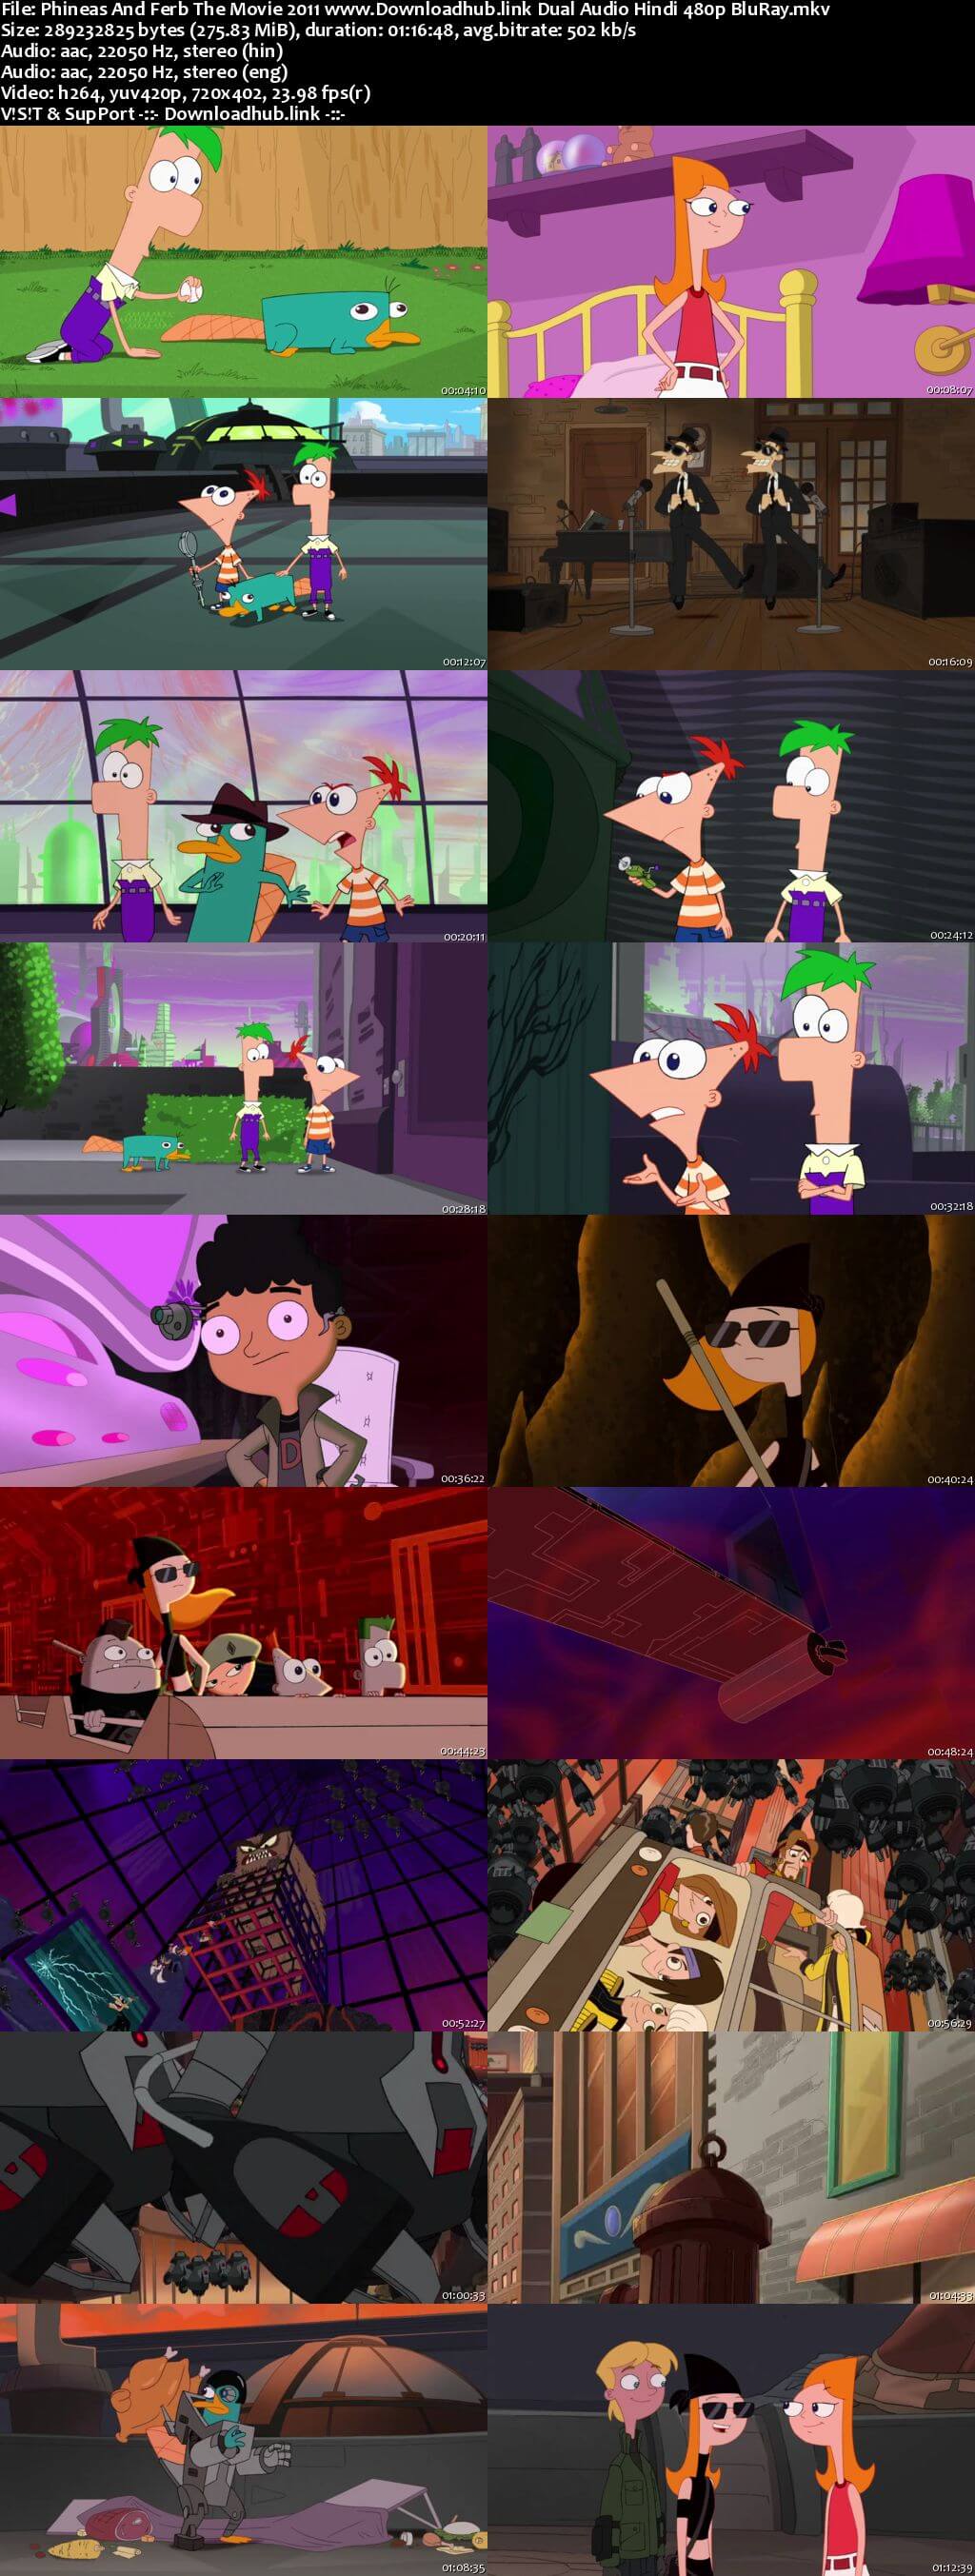 Phineas and Ferb the Movie 2011 Hindi Dual Audio 280MB BluRay 480p ESubs